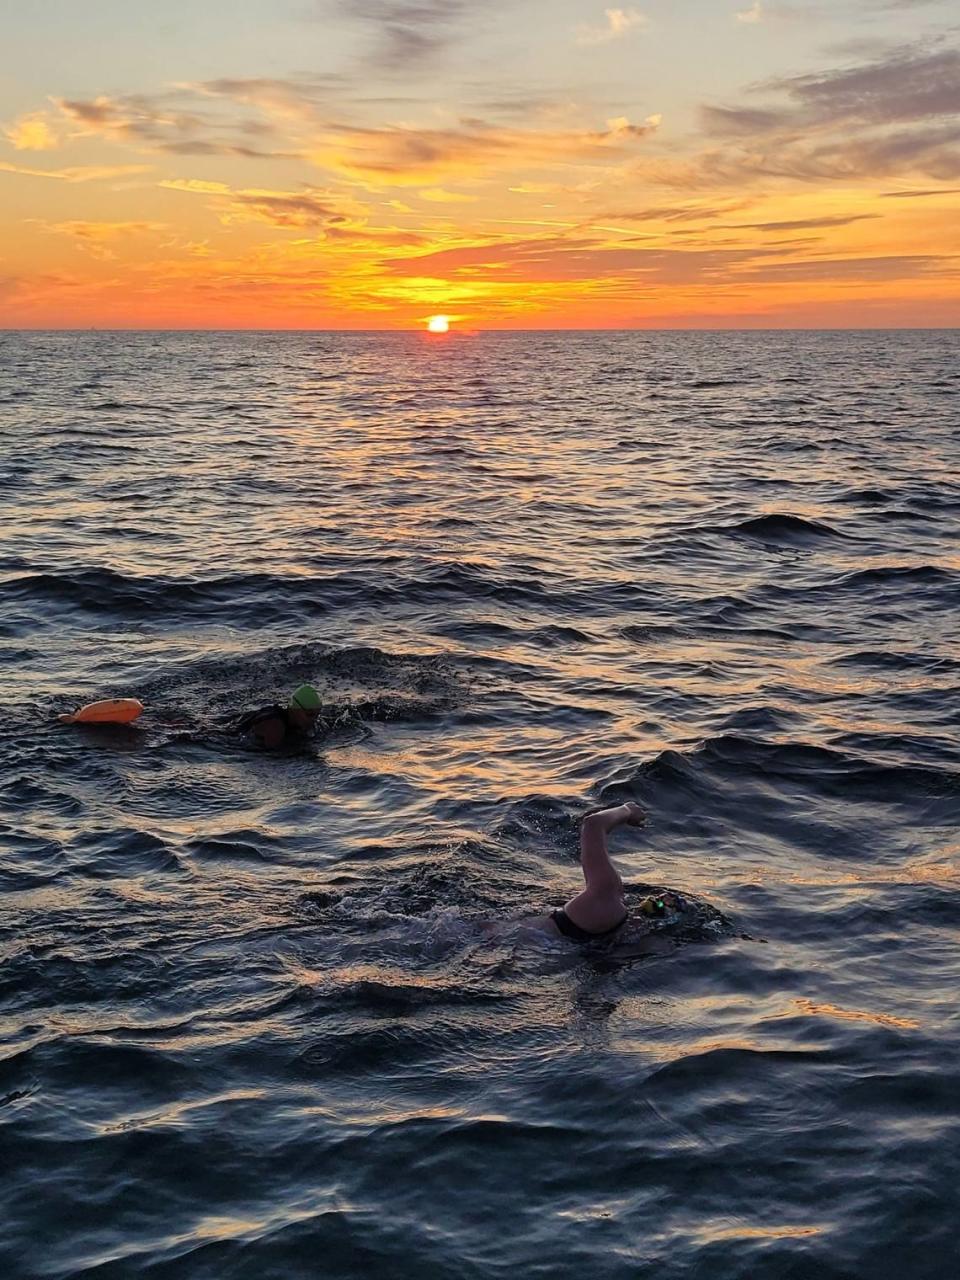 Molly, at right, and Kay Sanborn swim together in the English Channel shortly after sunrise last Wednesday morning.